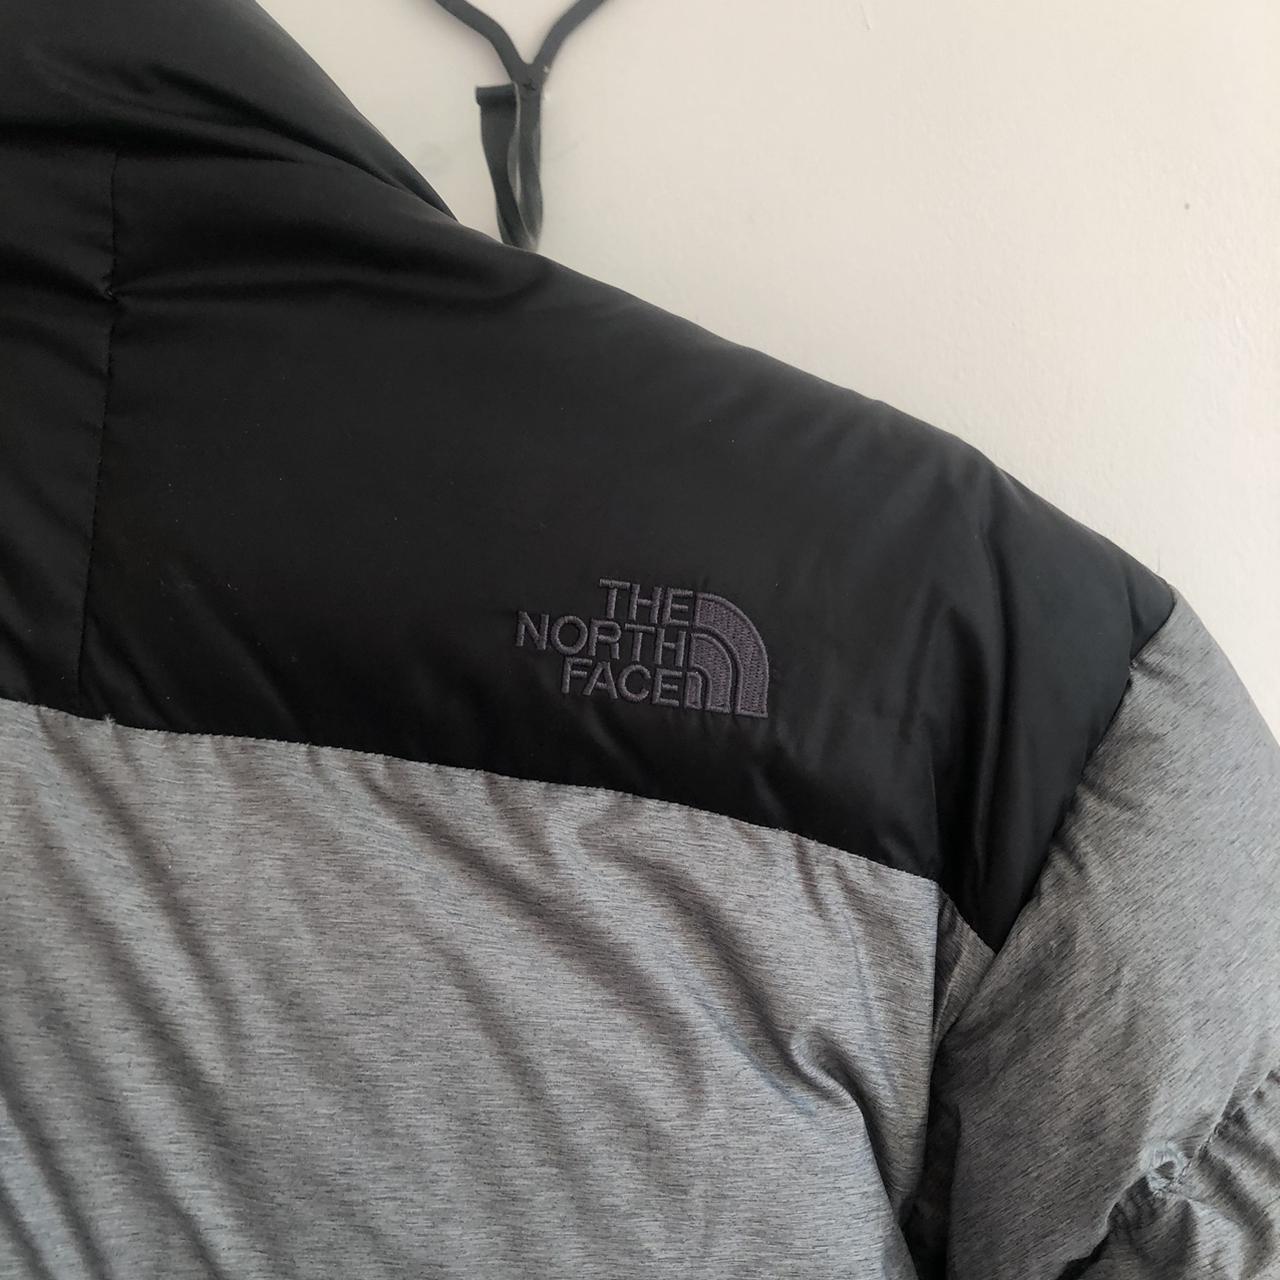 Grey and black the north face puffer jacket. Men’s... - Depop